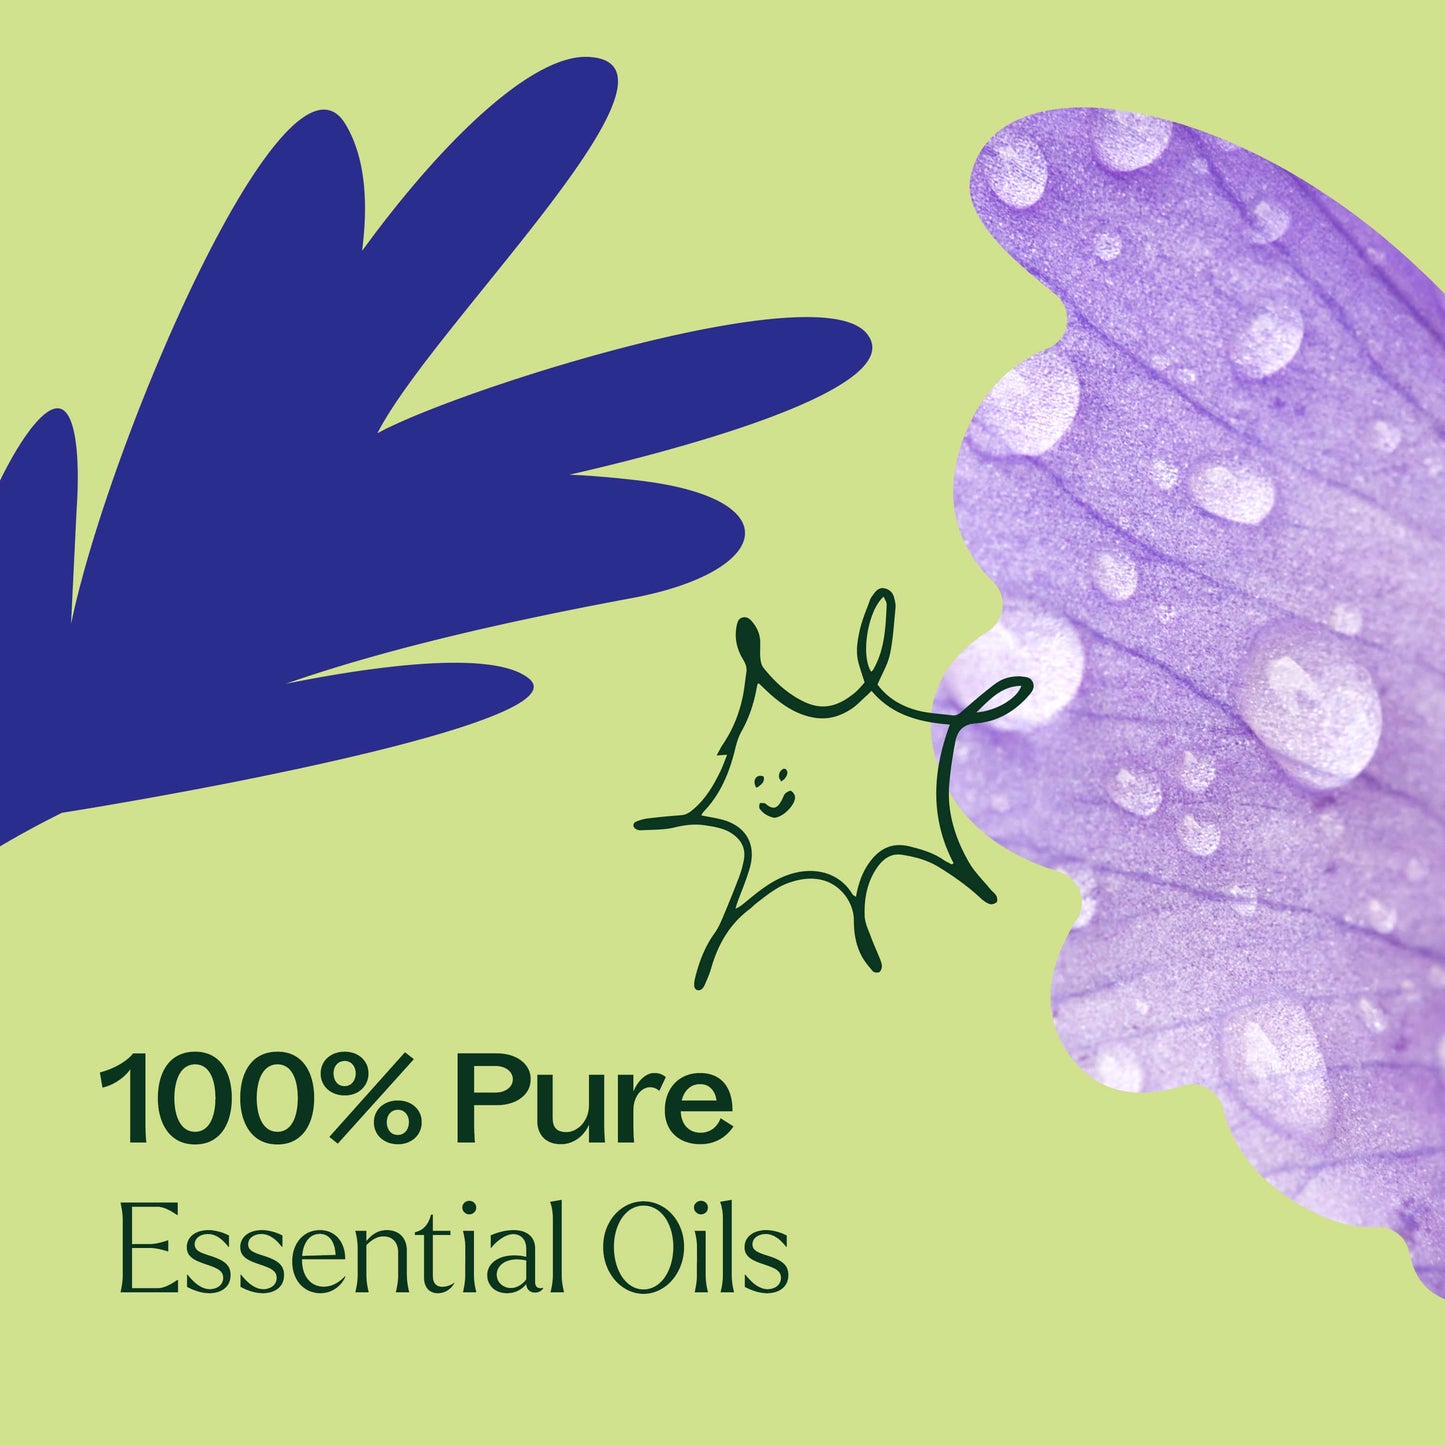 Hair Therapy Essential Oil Blend is 100% pure